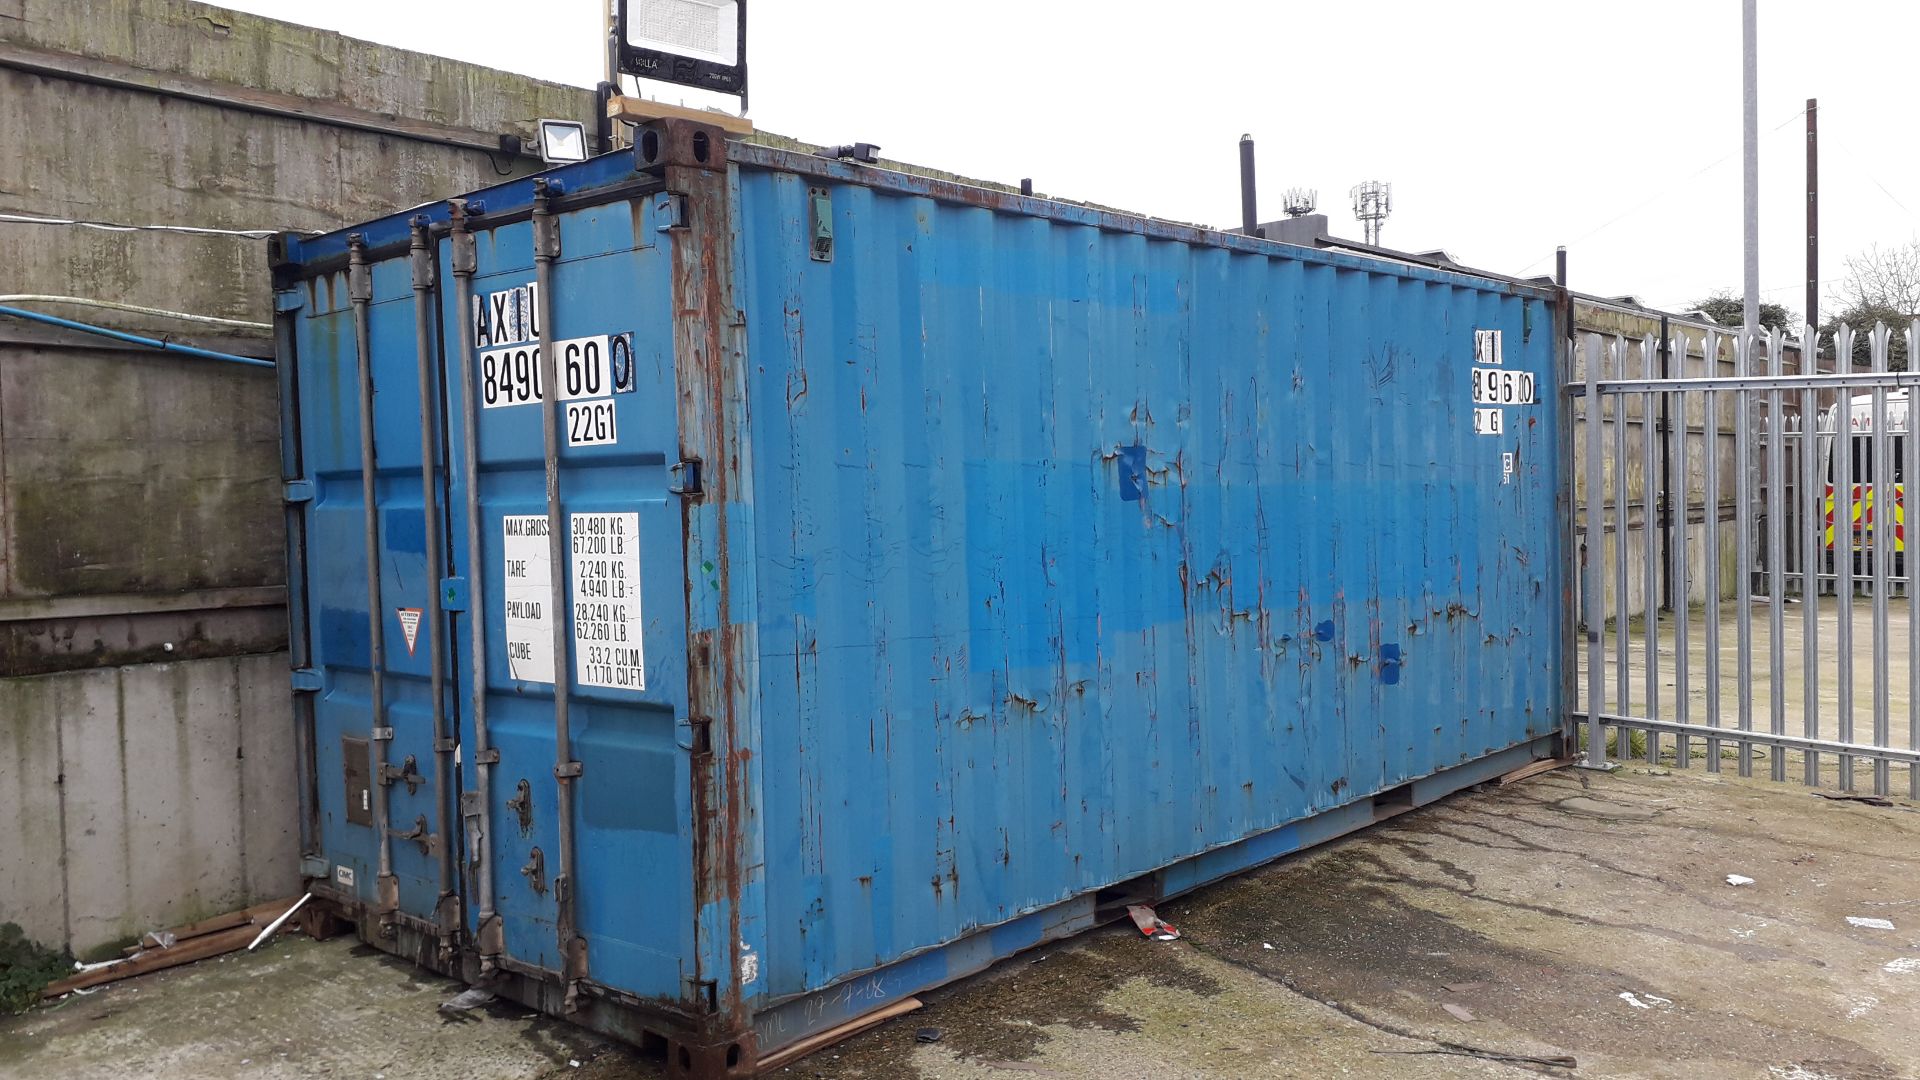 20ft CIMC Steel Shipping Container (2006) with con